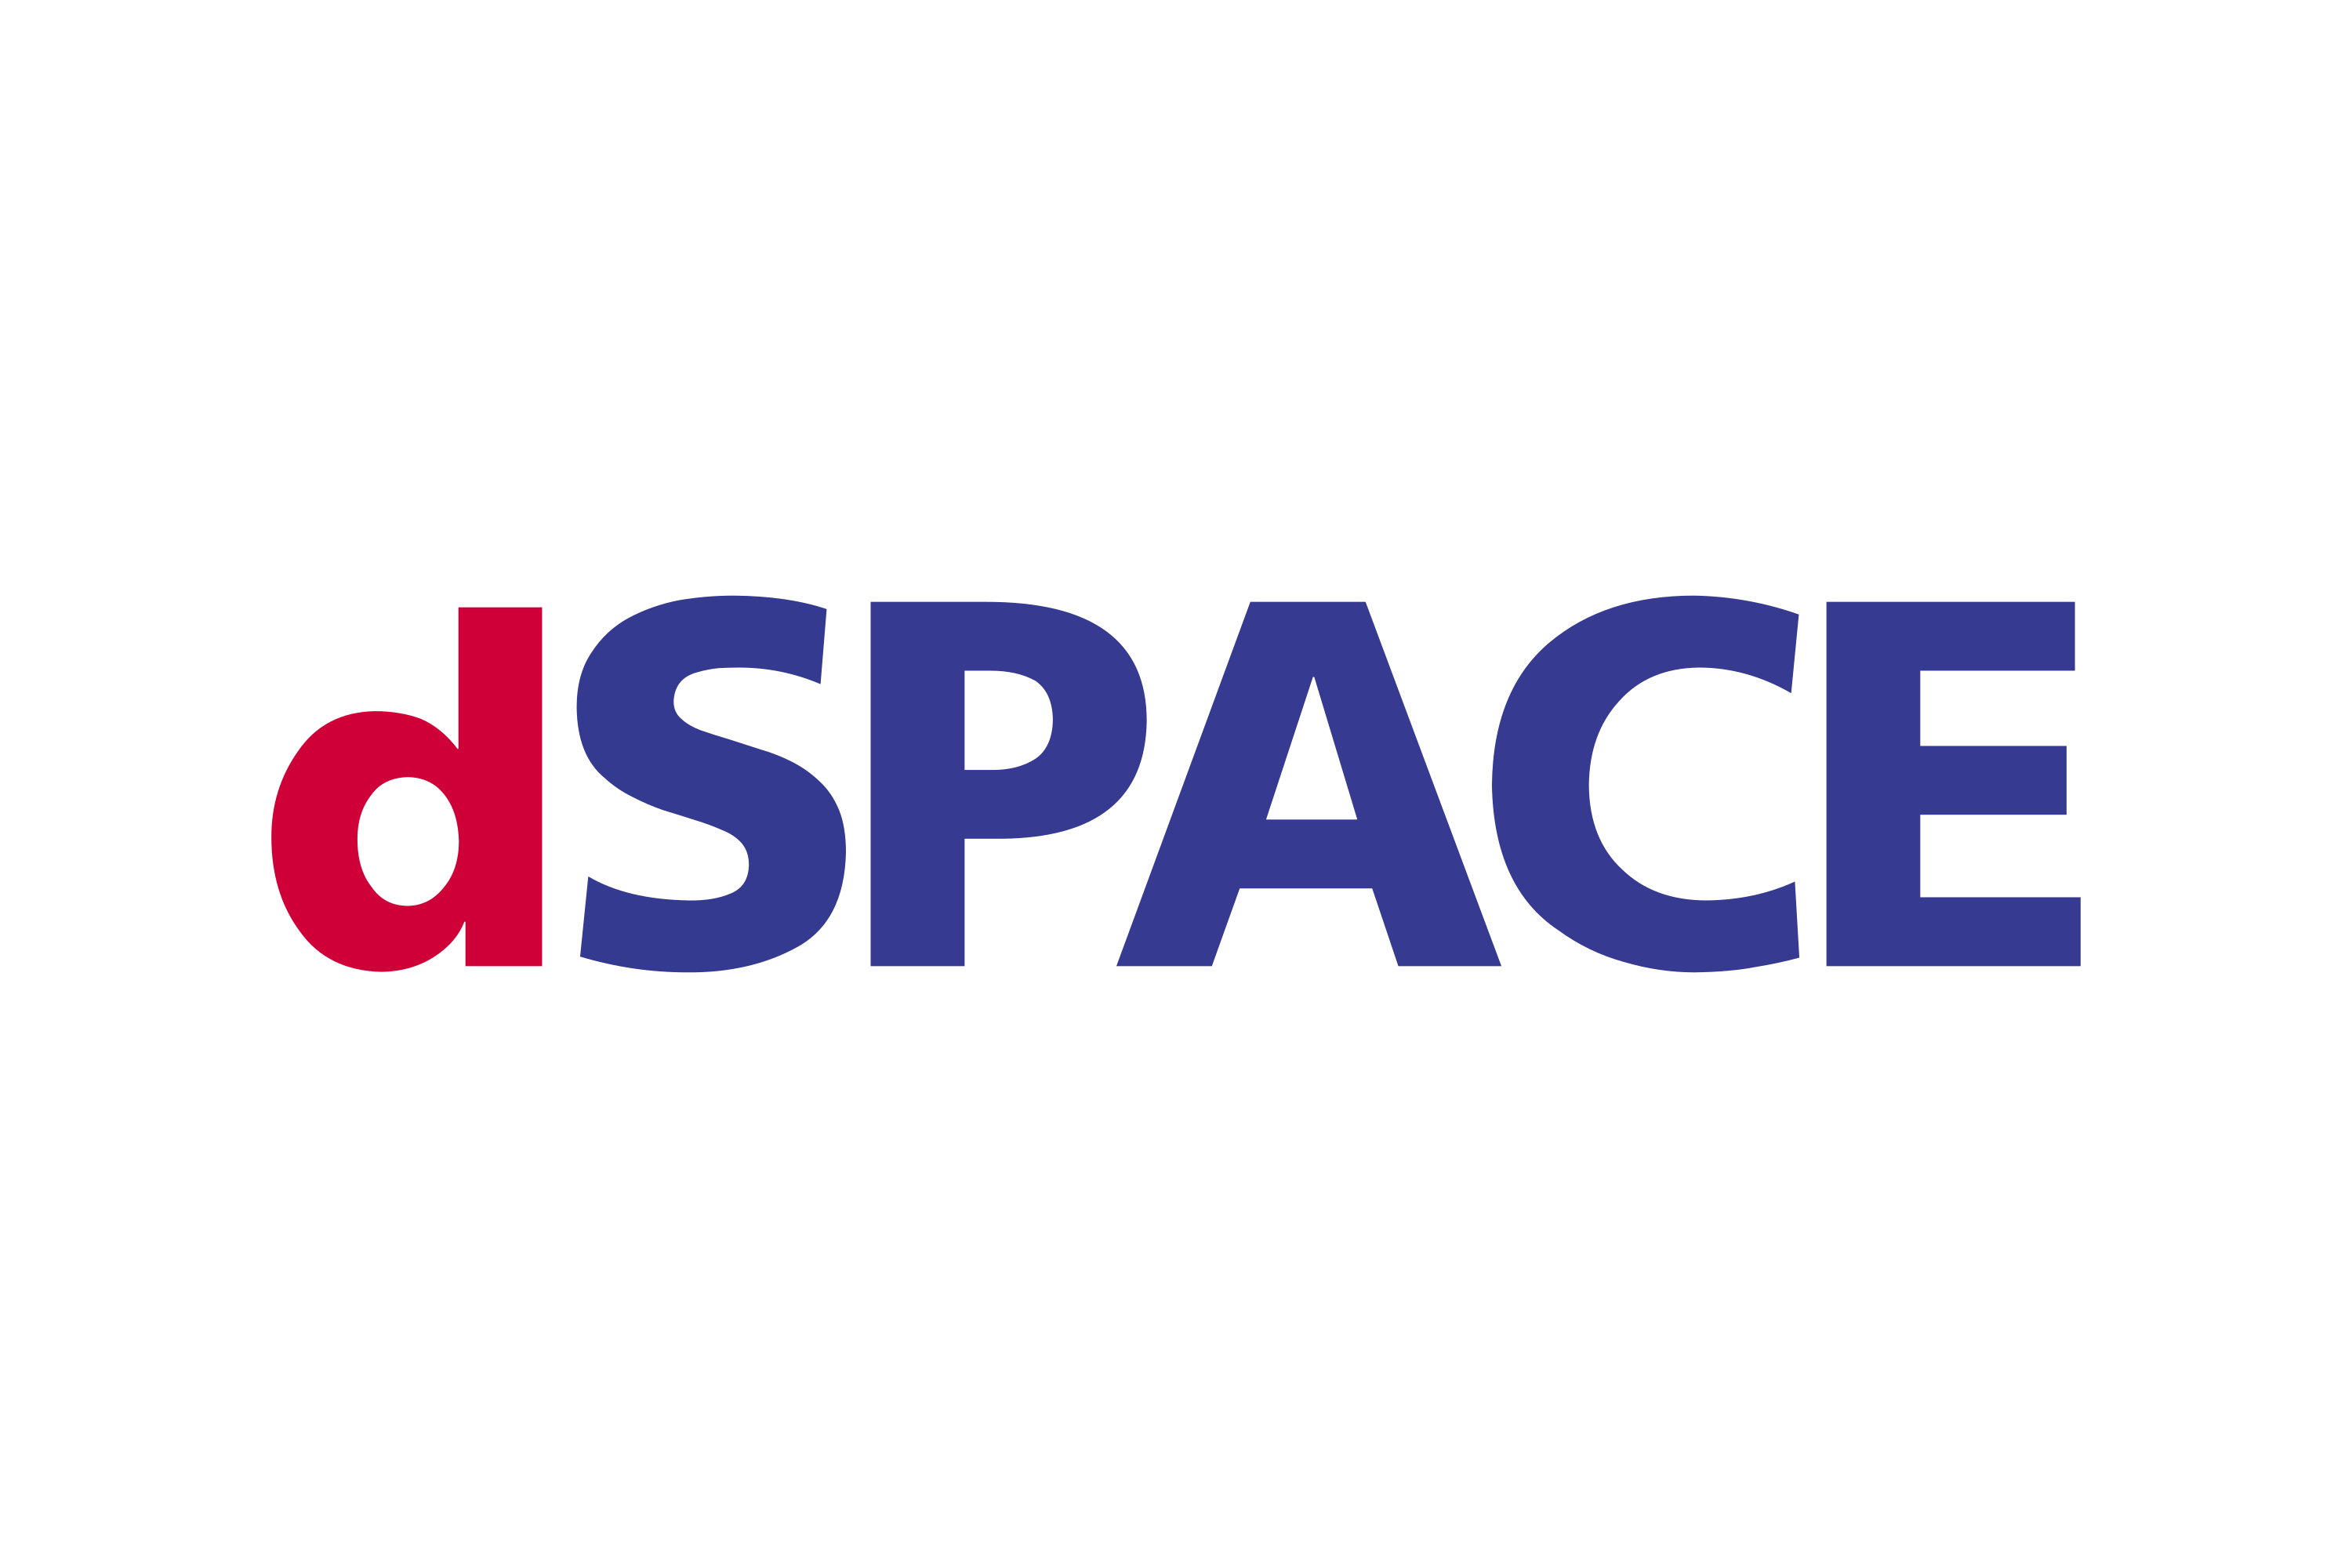 LOGO_DSPACE Home  